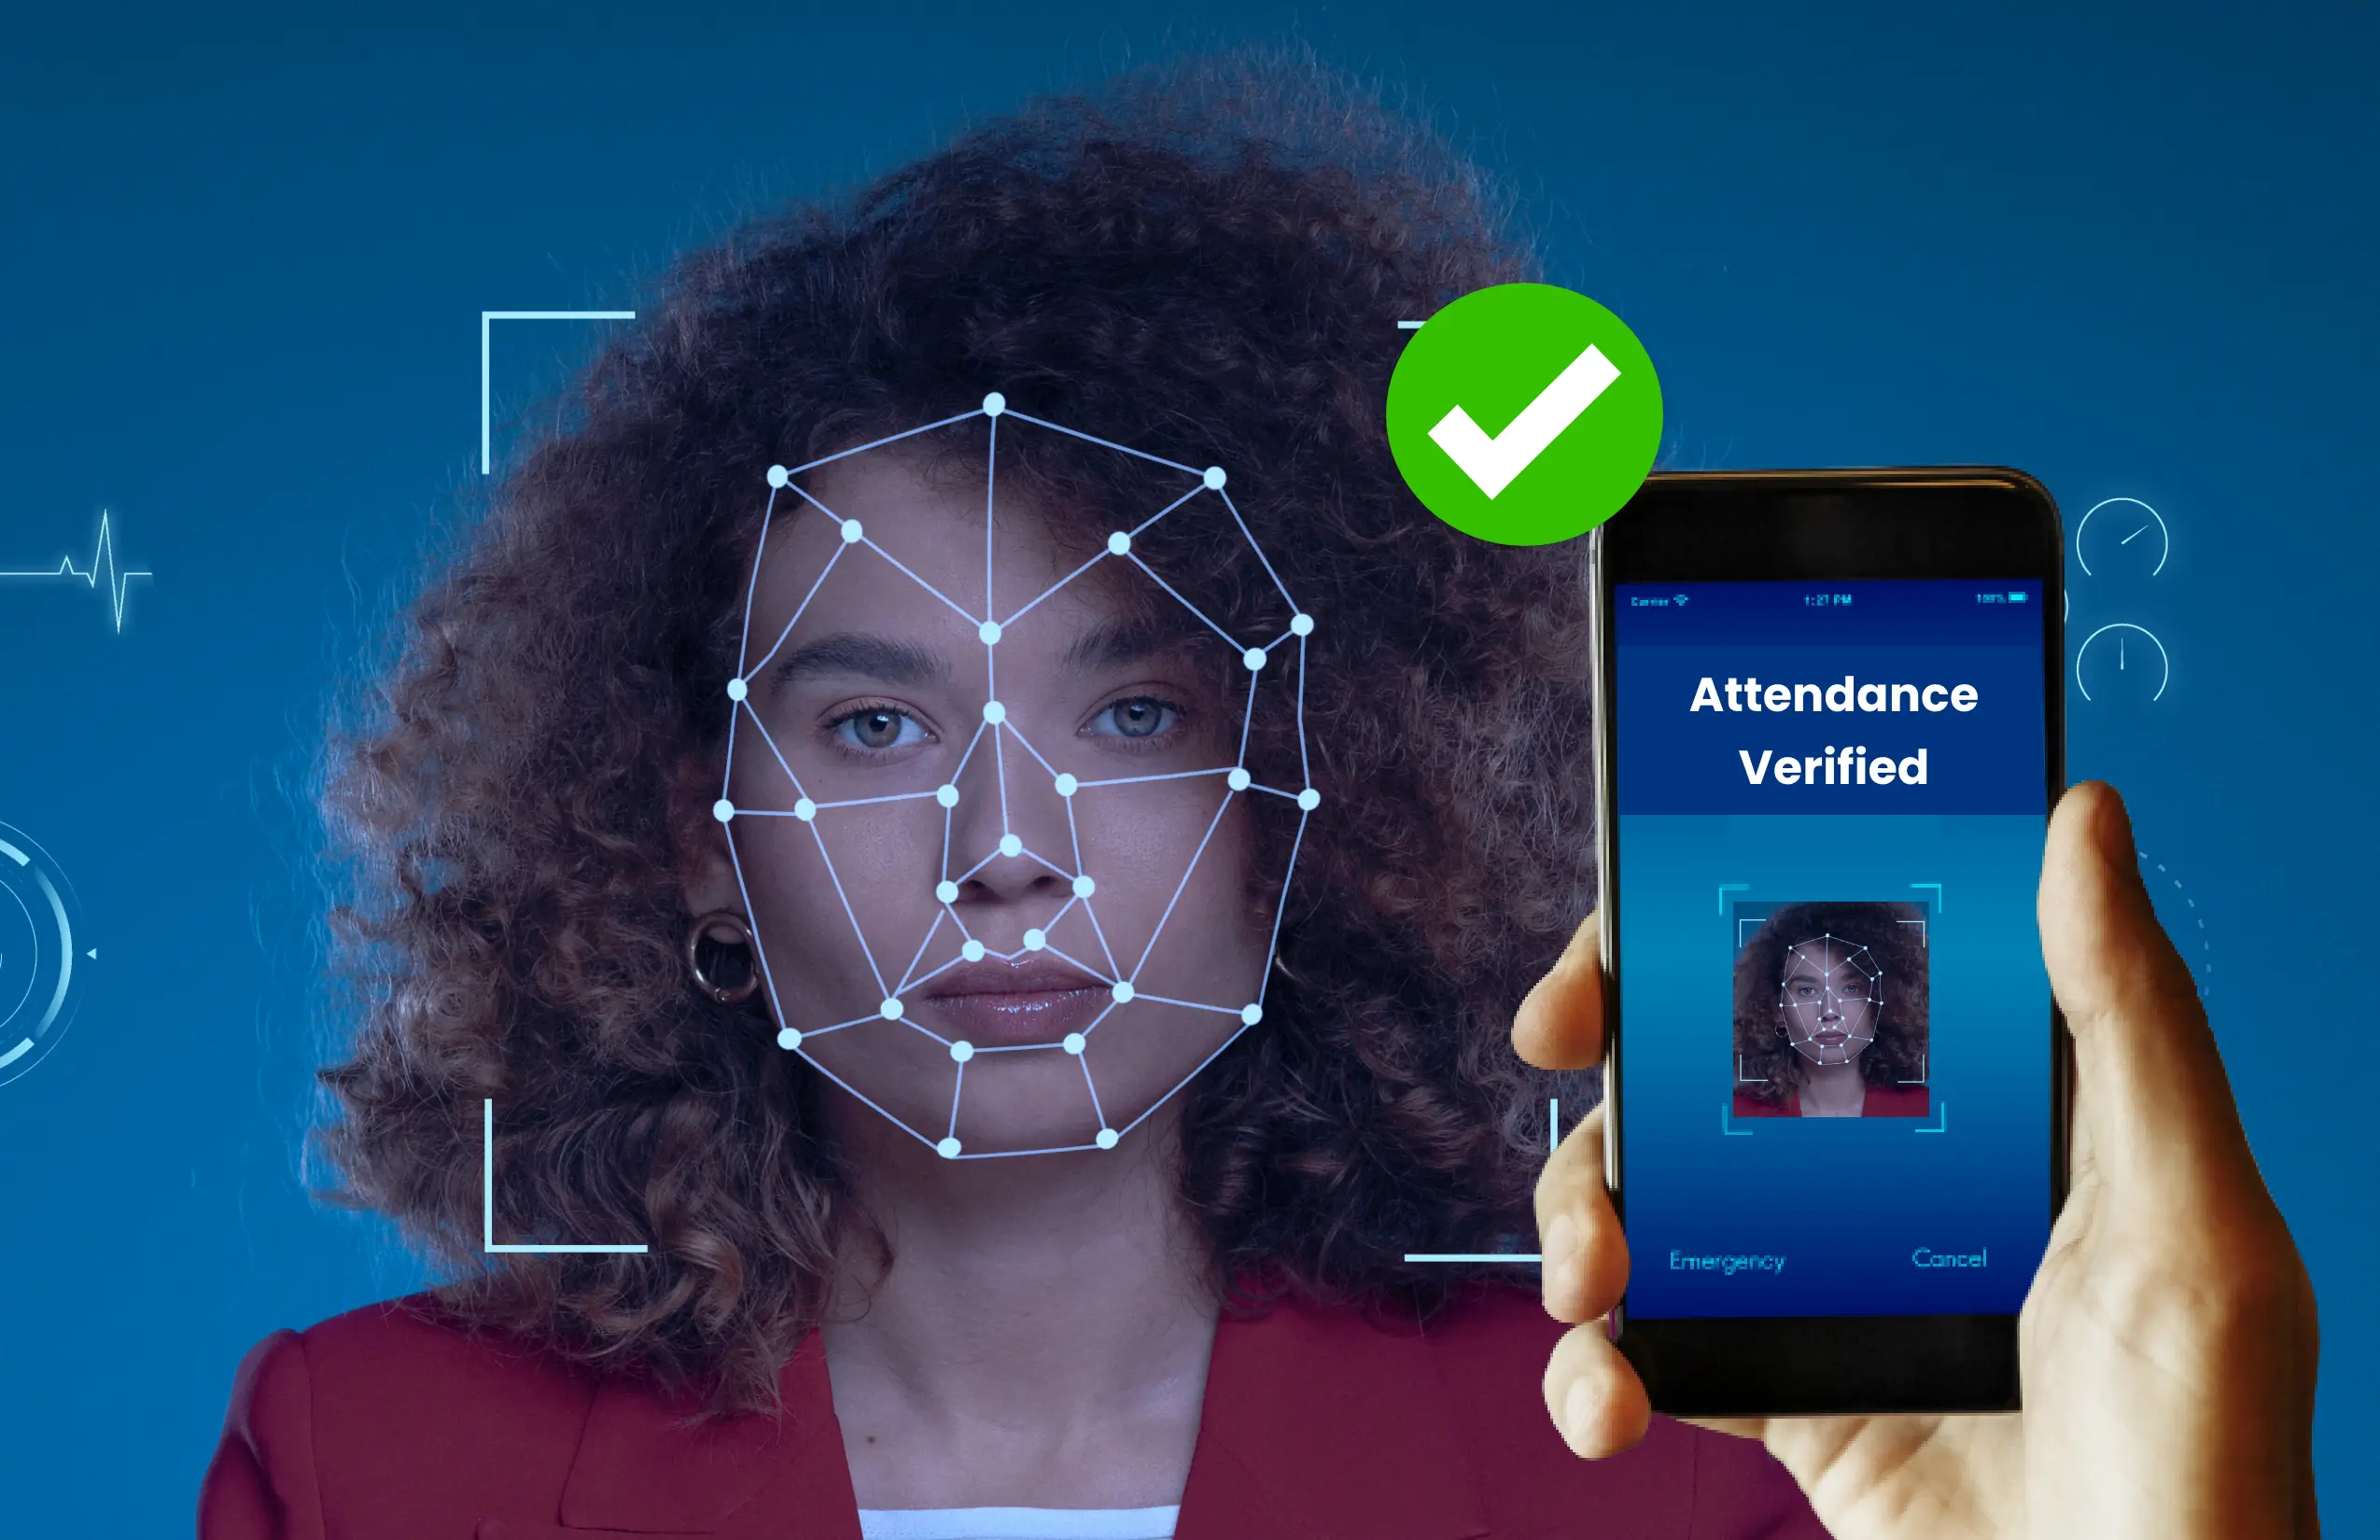 How does the face recognition attendance system work?